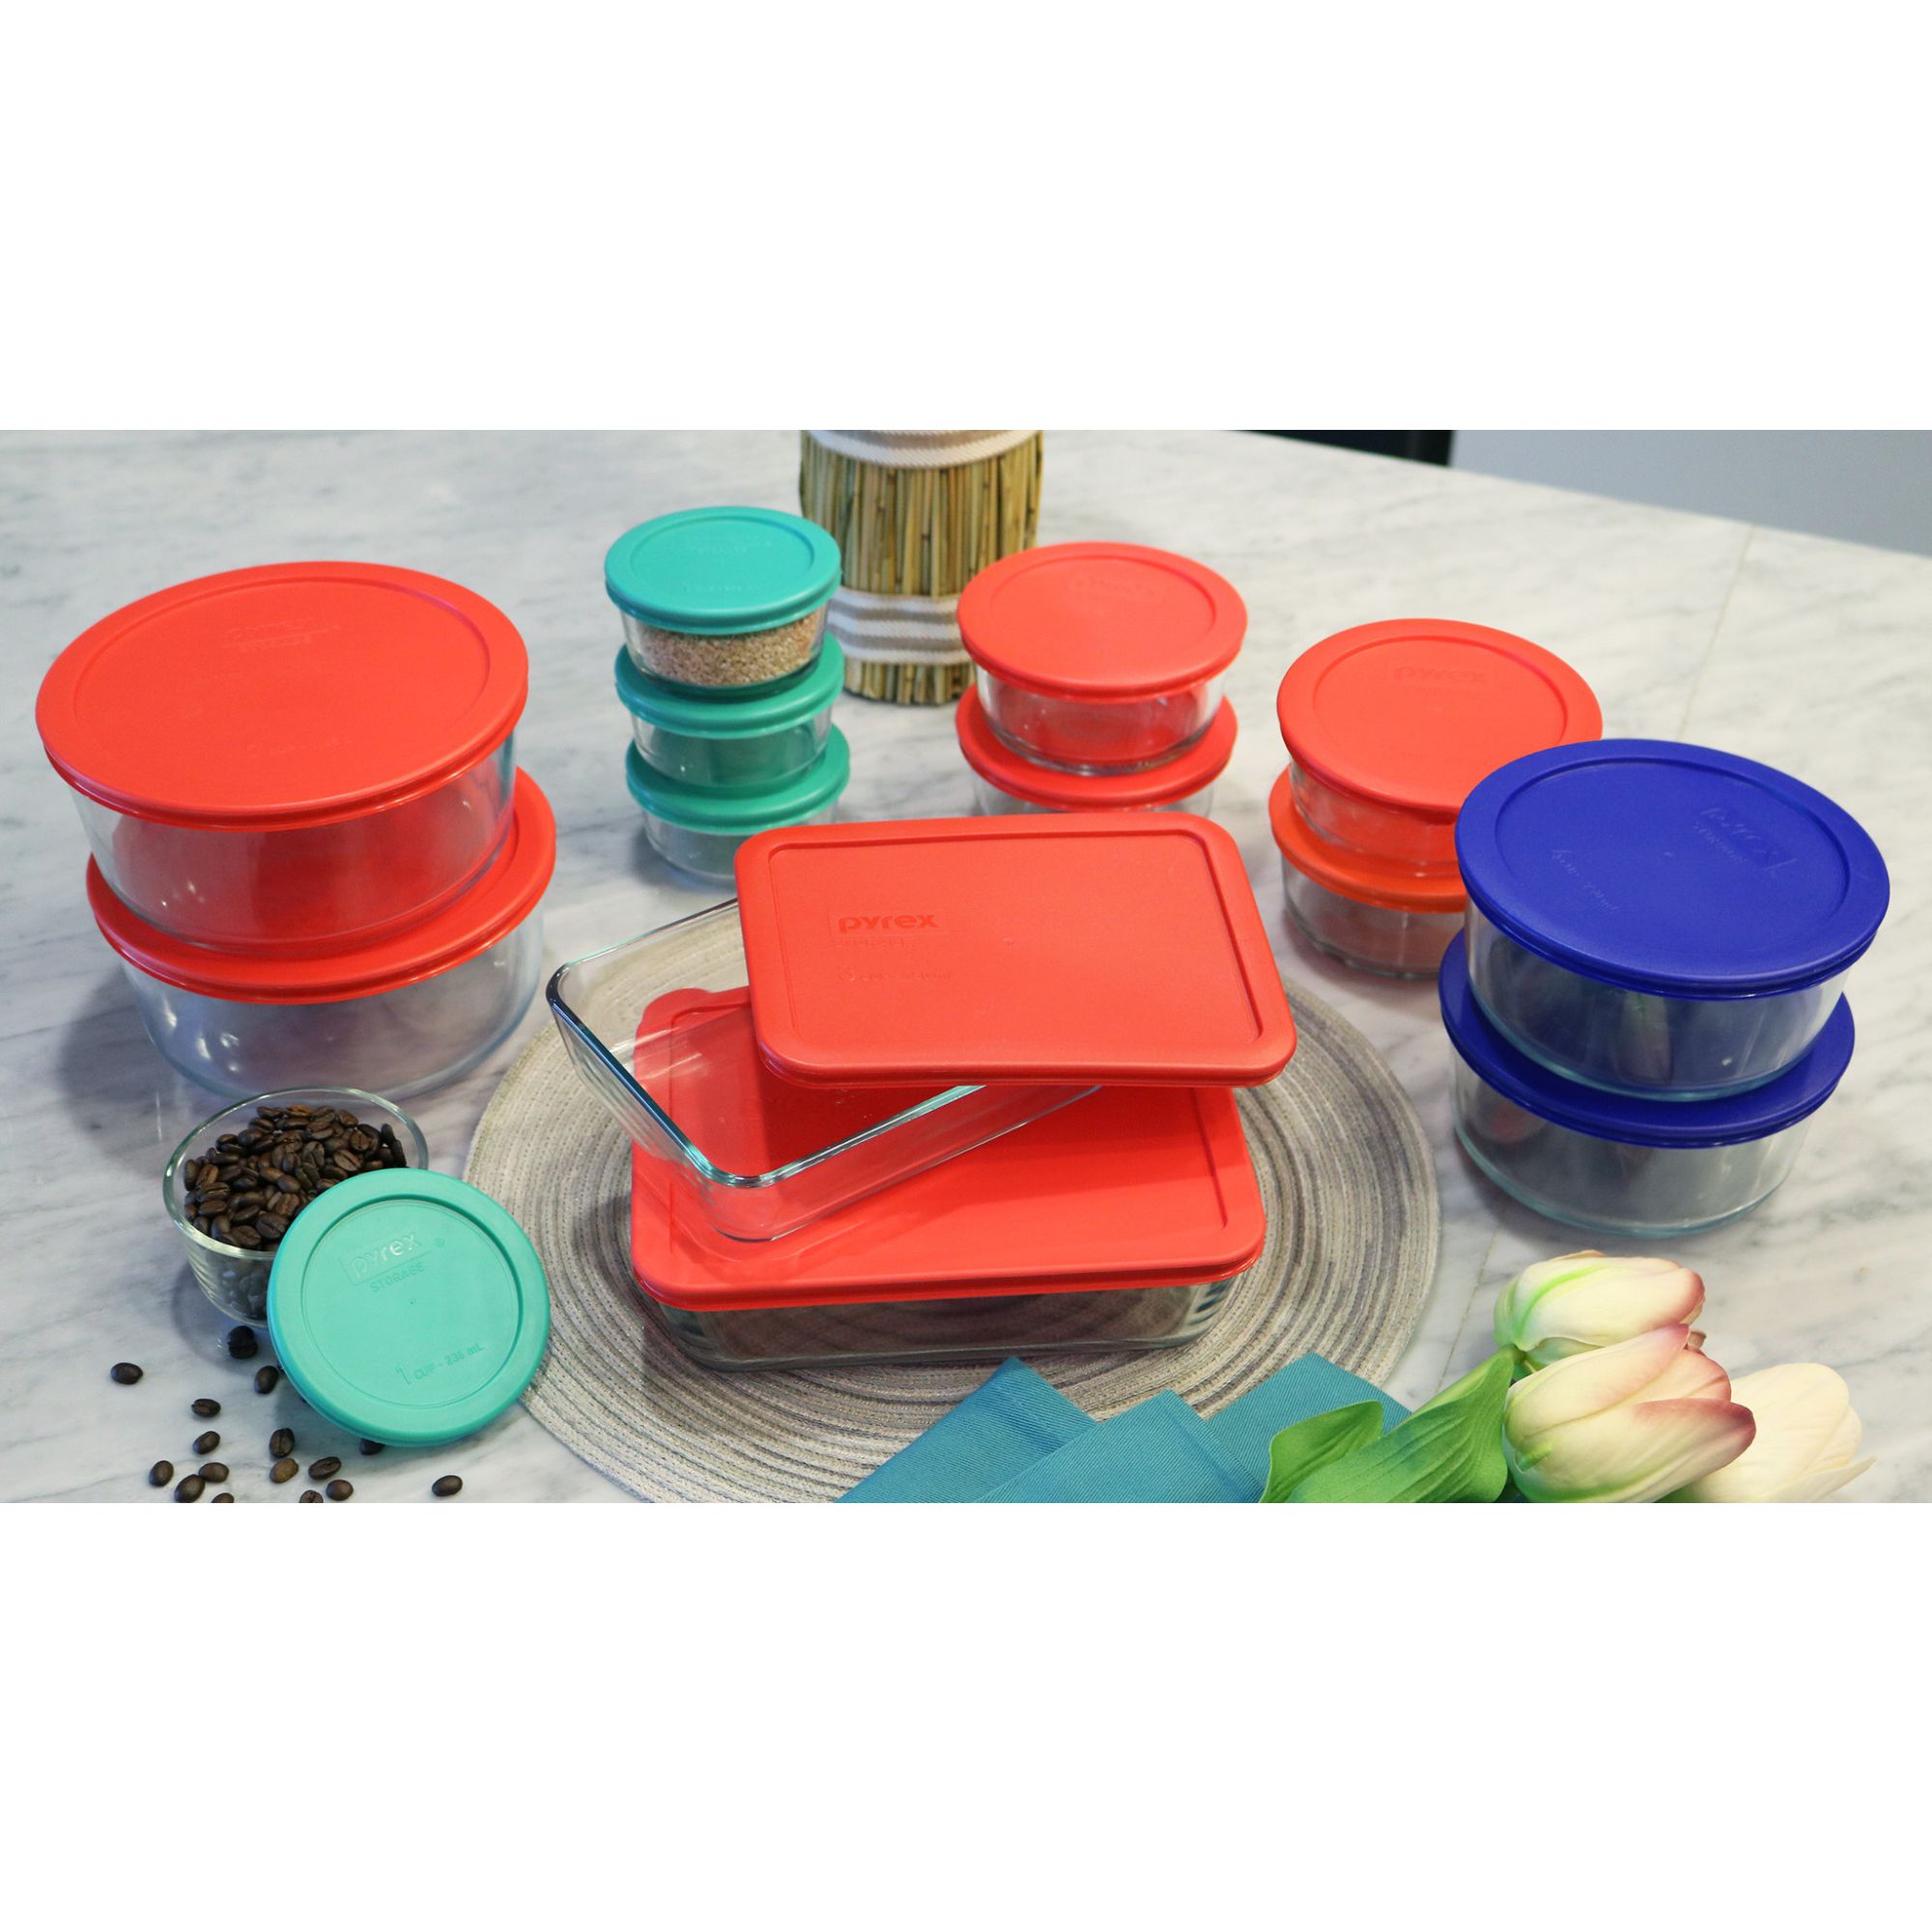 Pyrex Simply Food Storage & Bakeware Set with Colored Lids, 28 Piece - image 3 of 7